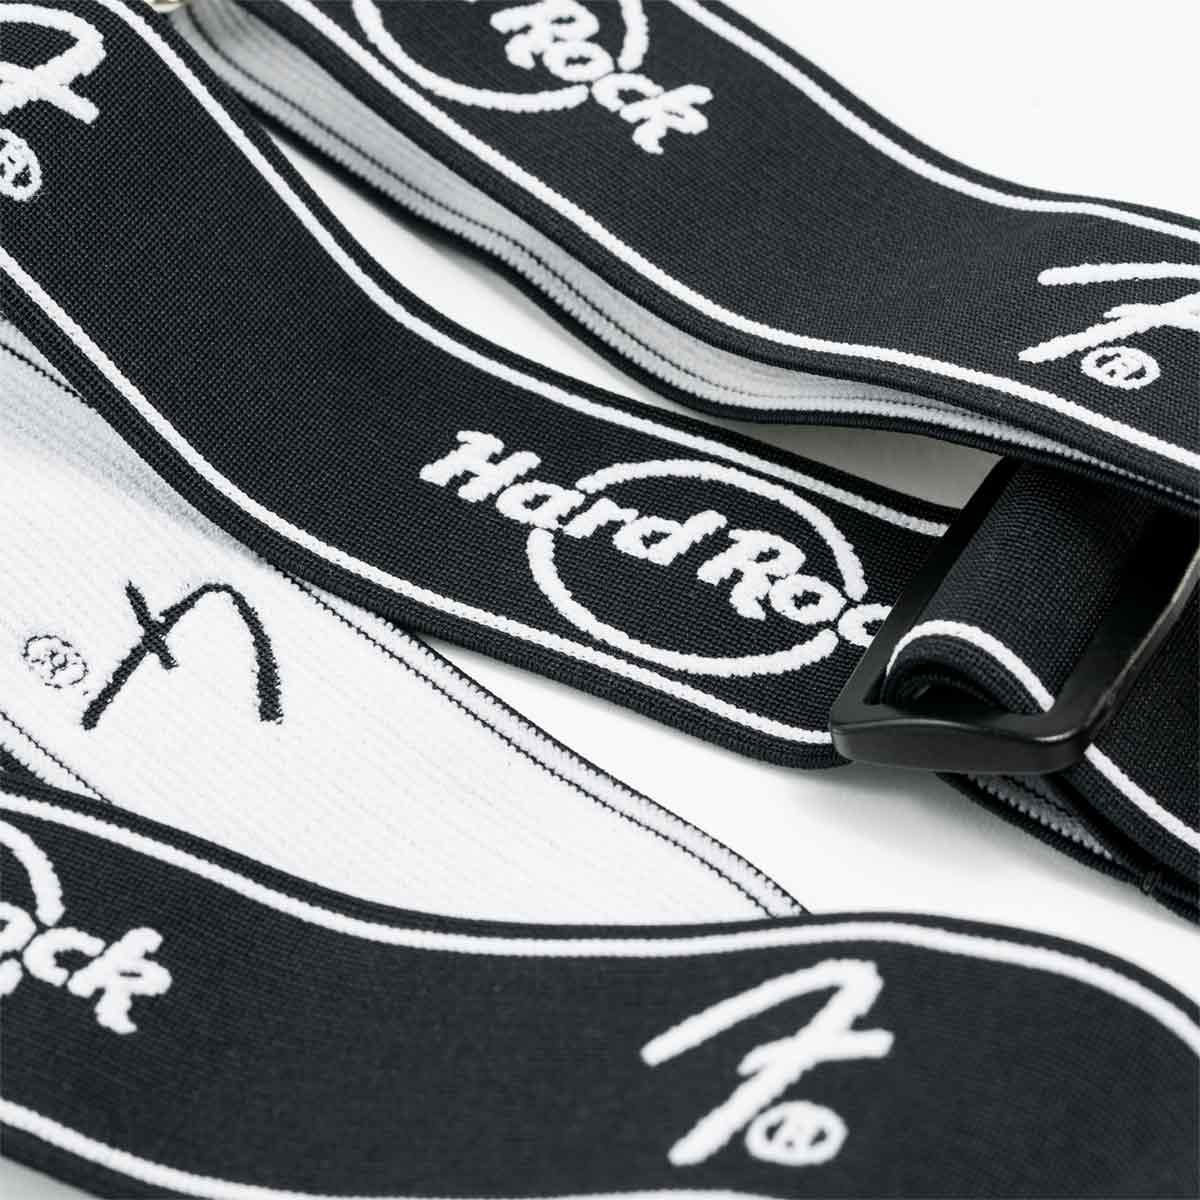 Fender x Hard Rock Weightless Guitar Strap in Black and White image number 2